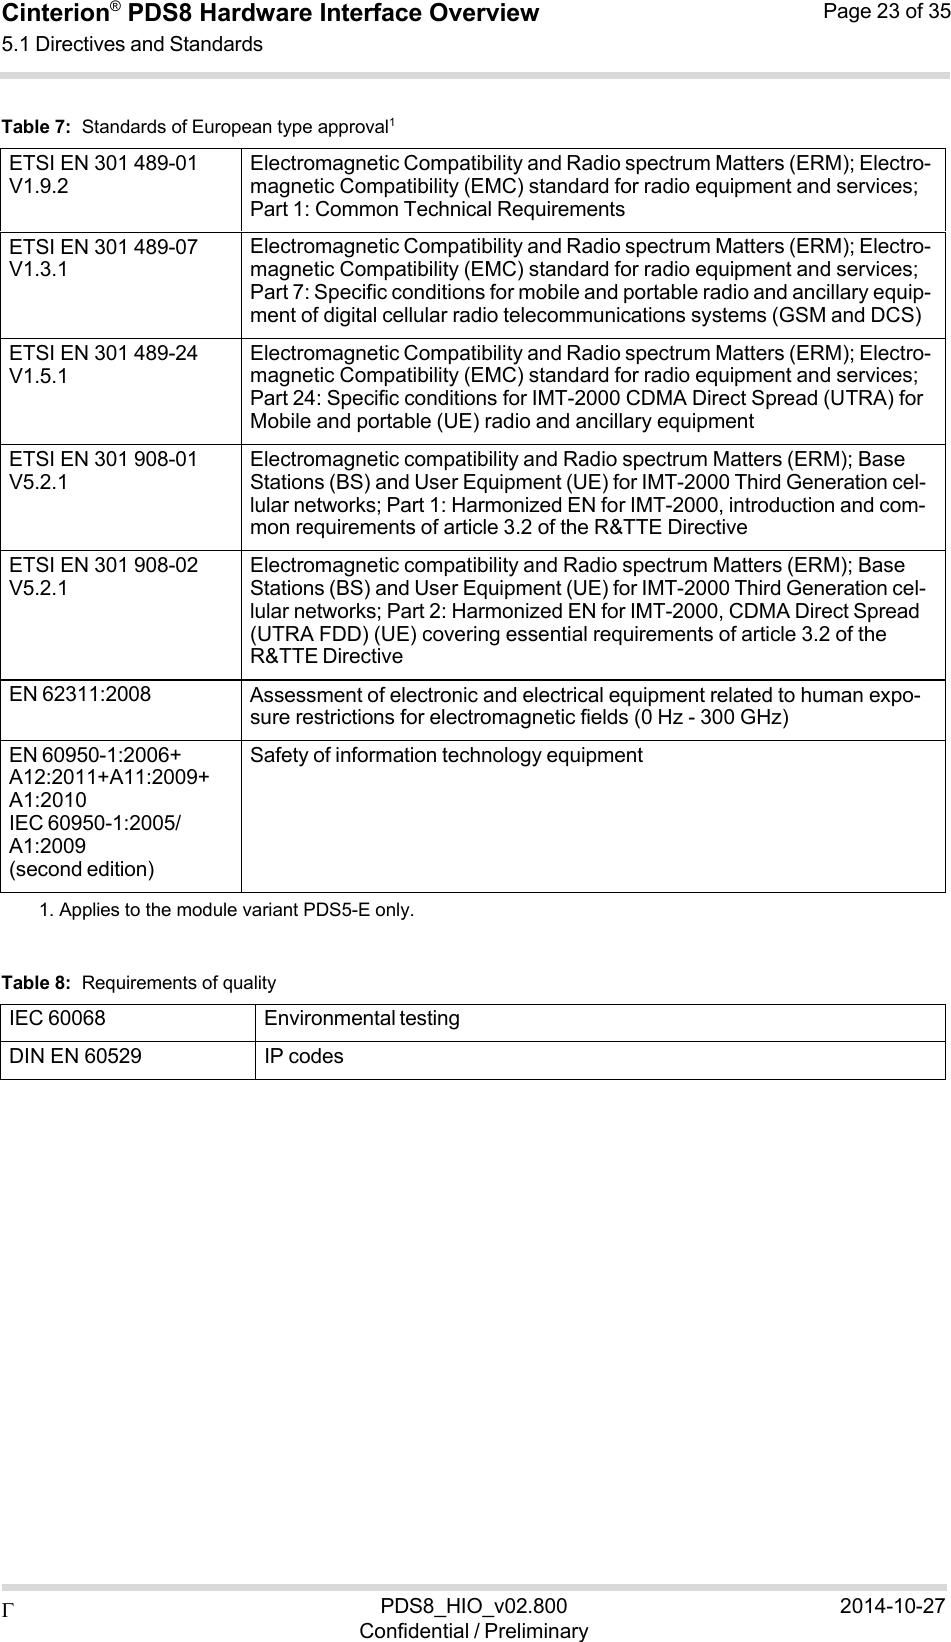  PDS8_HIO_v02.800Confidential / Preliminary2014-10-27Cinterion®  PDS8 Hardware Interface Overview 5.1 Directives and Standards Page 23 of 35   Table 7:  Standards of European type approval1  ETSI EN 301 489-01 V1.9.2 Electromagnetic Compatibility and Radio spectrum Matters (ERM); Electro- magnetic Compatibility (EMC) standard for radio equipment and services; Part 1: Common Technical Requirements ETSI EN 301 489-07 V1.3.1 Electromagnetic Compatibility and Radio spectrum Matters (ERM); Electro- magnetic Compatibility (EMC) standard for radio equipment and services; Part 7: Specific conditions for mobile and portable radio and ancillary equip- ment of digital cellular radio telecommunications systems (GSM and DCS) ETSI EN 301 489-24 V1.5.1 Electromagnetic Compatibility and Radio spectrum Matters (ERM); Electro- magnetic Compatibility (EMC) standard for radio equipment and services; Part 24: Specific conditions for IMT-2000 CDMA Direct Spread (UTRA) for Mobile and portable (UE) radio and ancillary equipment ETSI EN 301 908-01 V5.2.1 Electromagnetic compatibility and Radio spectrum Matters (ERM); Base Stations (BS) and User Equipment (UE) for IMT-2000 Third Generation cel- lular networks; Part 1: Harmonized EN for IMT-2000, introduction and com- mon requirements of article 3.2 of the R&amp;TTE Directive ETSI EN 301 908-02 V5.2.1 Electromagnetic compatibility and Radio spectrum Matters (ERM); Base Stations (BS) and User Equipment (UE) for IMT-2000 Third Generation cel- lular networks; Part 2: Harmonized EN for IMT-2000, CDMA Direct Spread (UTRA FDD) (UE) covering essential requirements of article 3.2 of the R&amp;TTE Directive EN 62311:2008 Assessment of electronic and electrical equipment related to human expo- sure restrictions for electromagnetic fields (0 Hz - 300 GHz) EN 60950-1:2006+ A12:2011+A11:2009+ A1:2010 IEC 60950-1:2005/ A1:2009 (second edition) Safety of information technology equipment1. Applies to the module variant PDS5-E only.   Table 8:  Requirements of quality  IEC 60068 Environmental testingDIN EN 60529 IP codes 